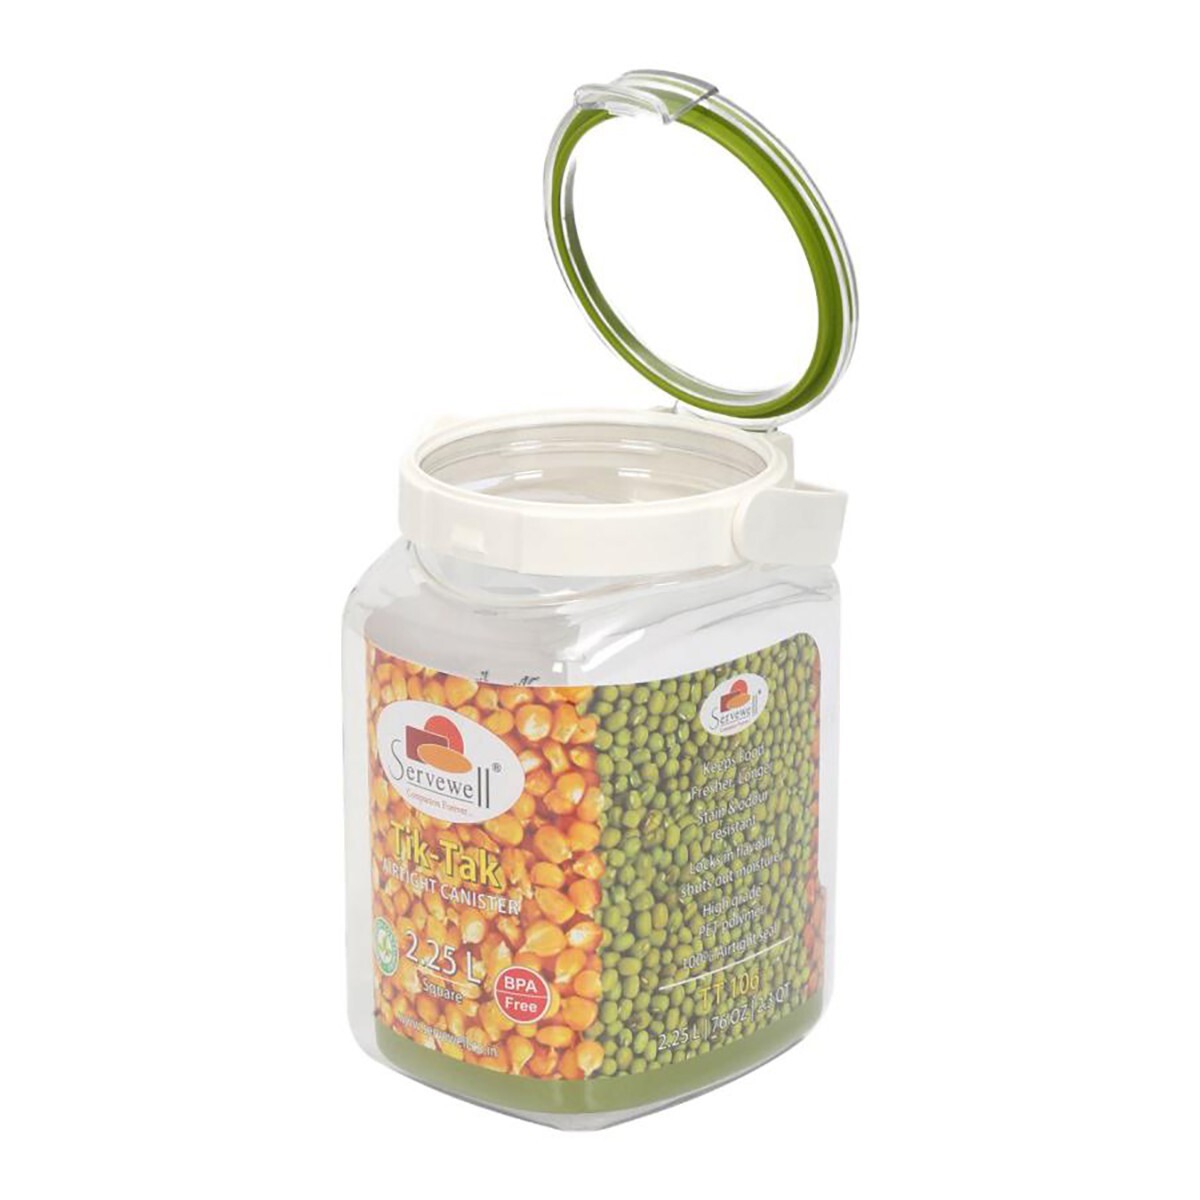 Servewell TT 106 Square Canister 2.25 L